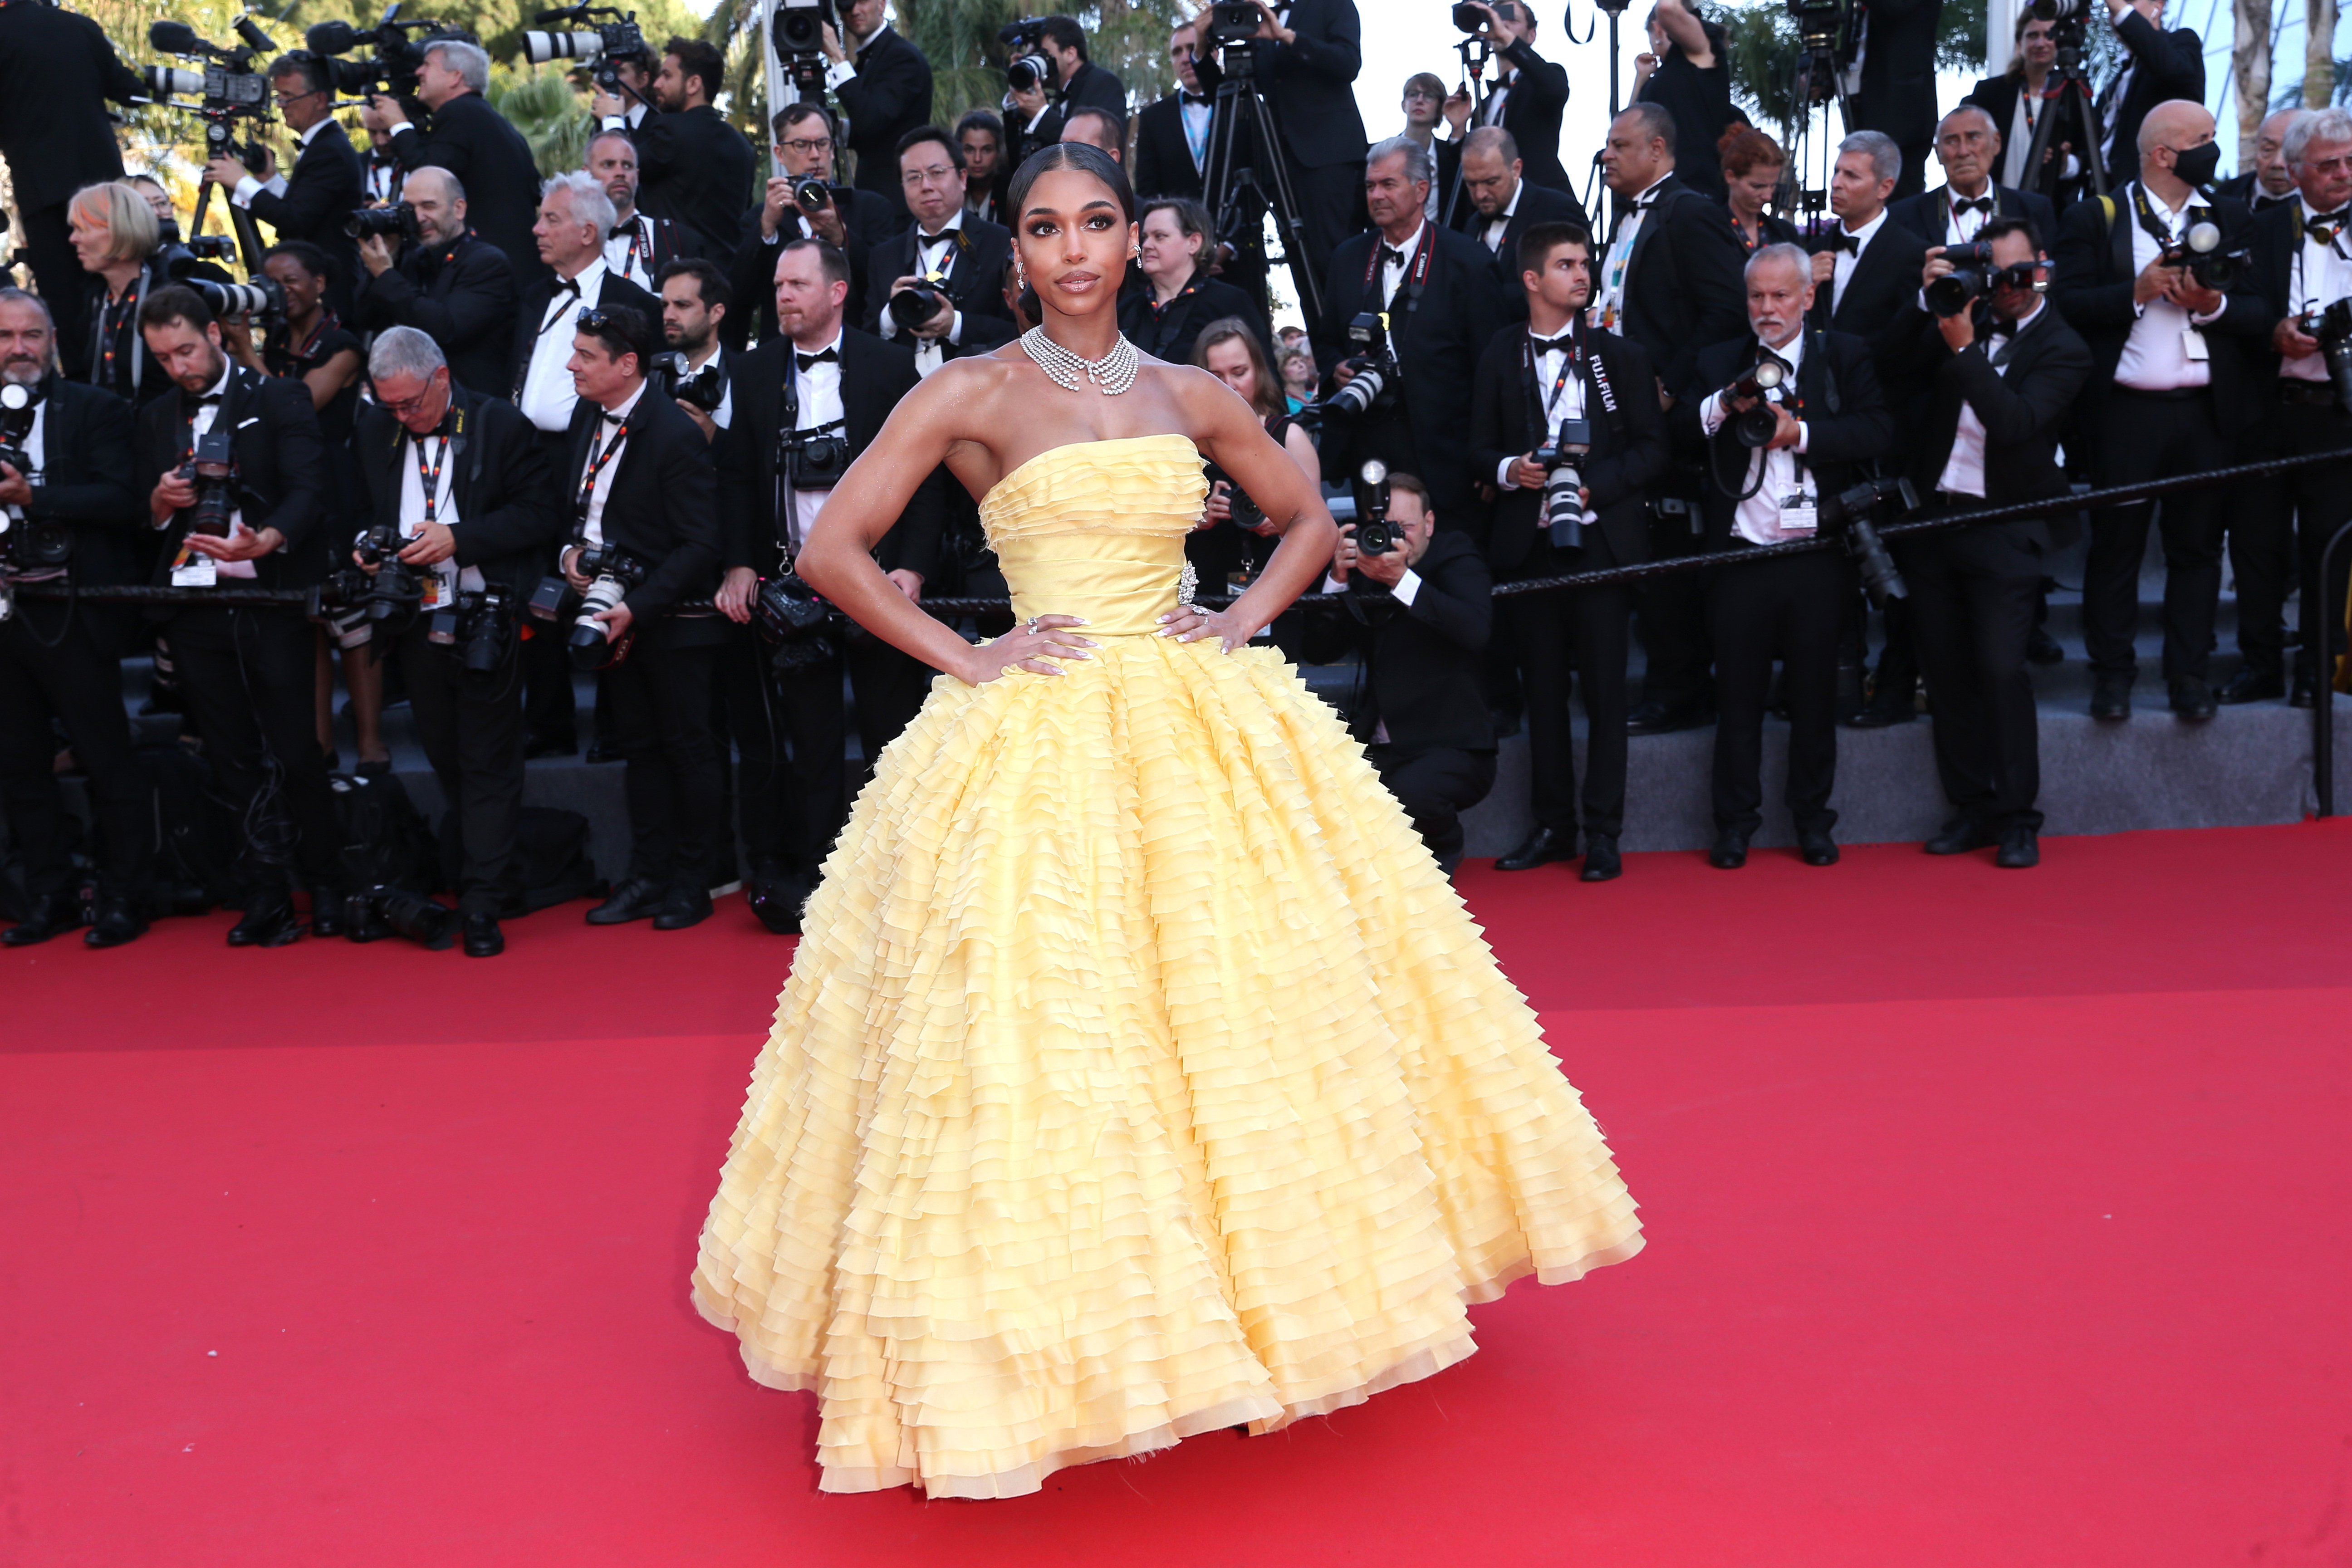 Lori Harvey attends the screening of "Final Cut (Coupez!)" and opening ceremony red carpet for the 75th annual Cannes film festival at Palais des Festivals on May 17, 2022 in Cannes, France. | Source: Getty Images